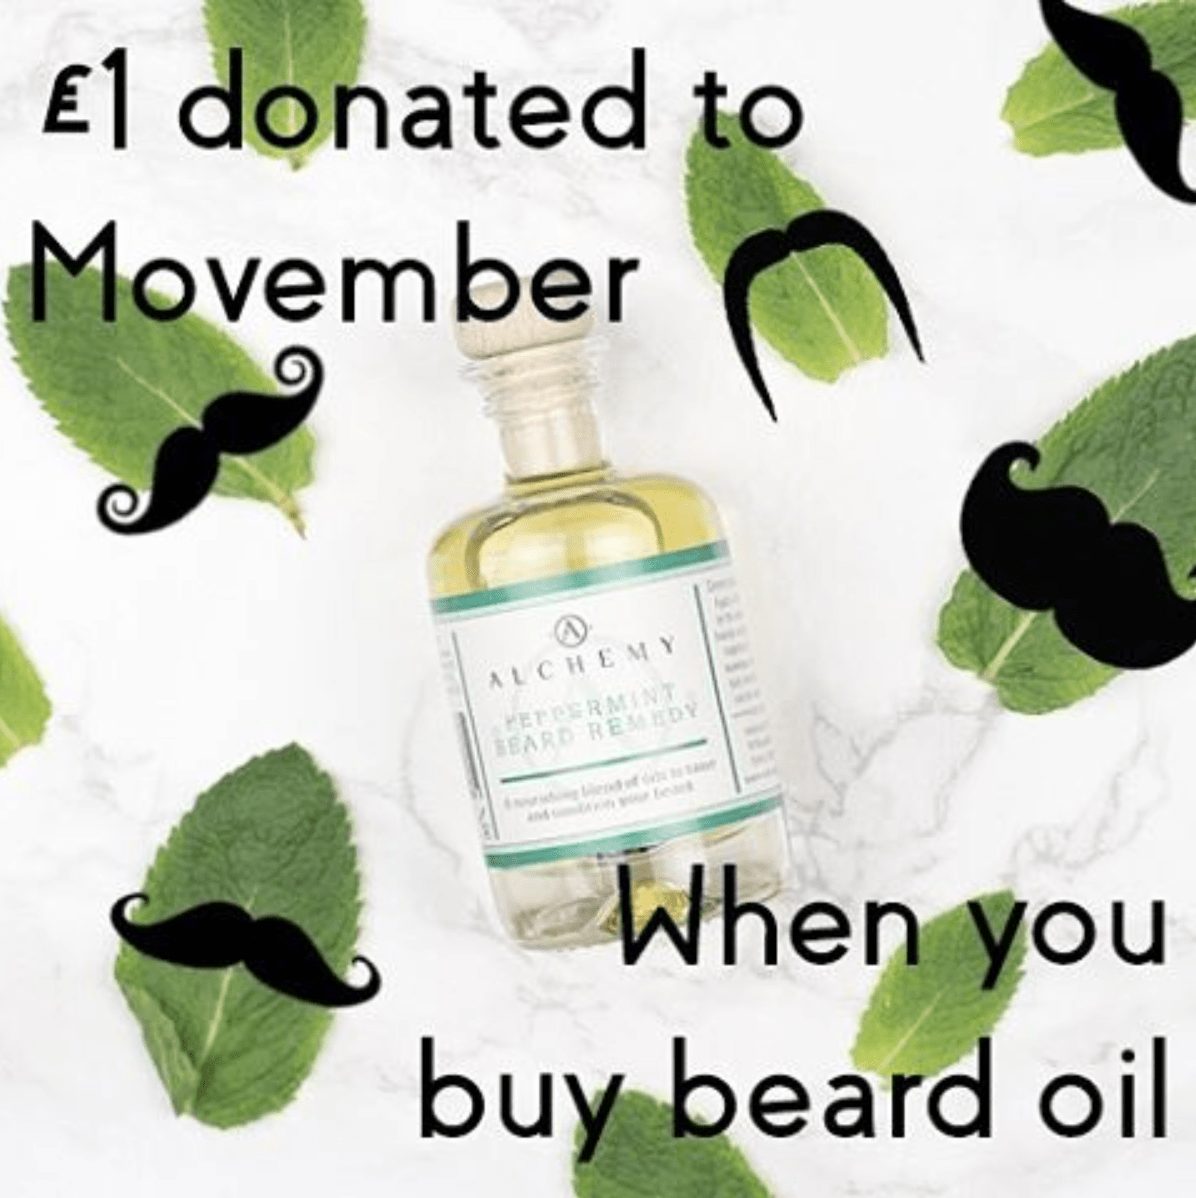 £1 donated to Movember when you buy beard oil